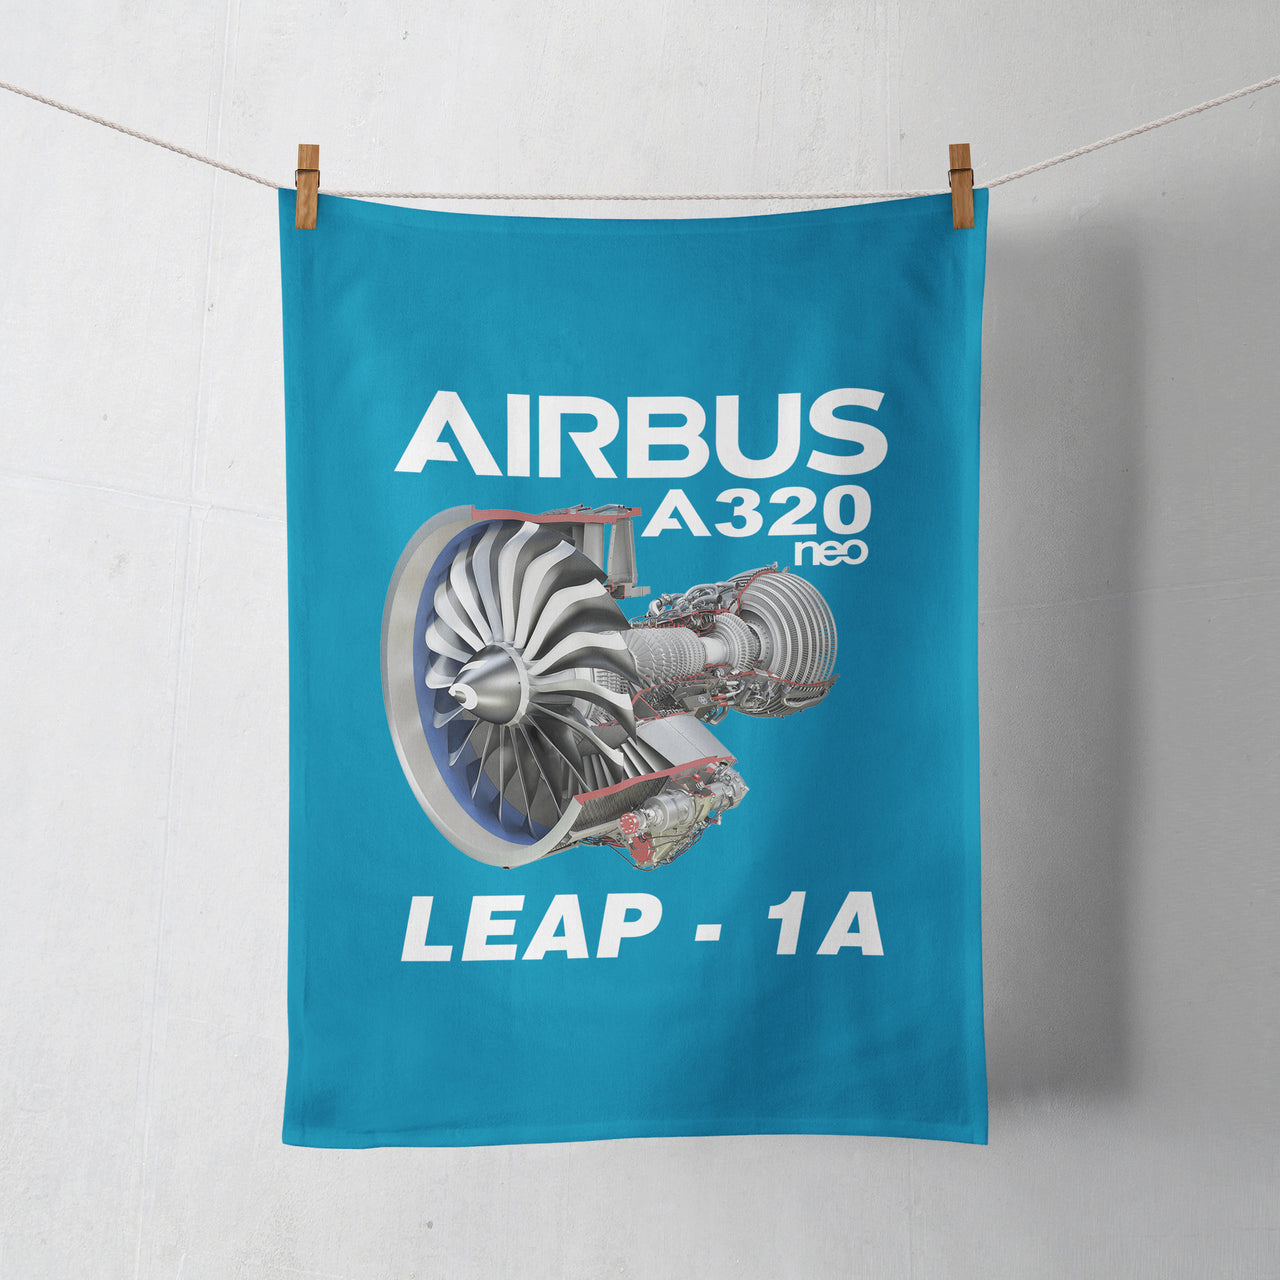 Airbus A320neo & Leap 1A Designed Towels